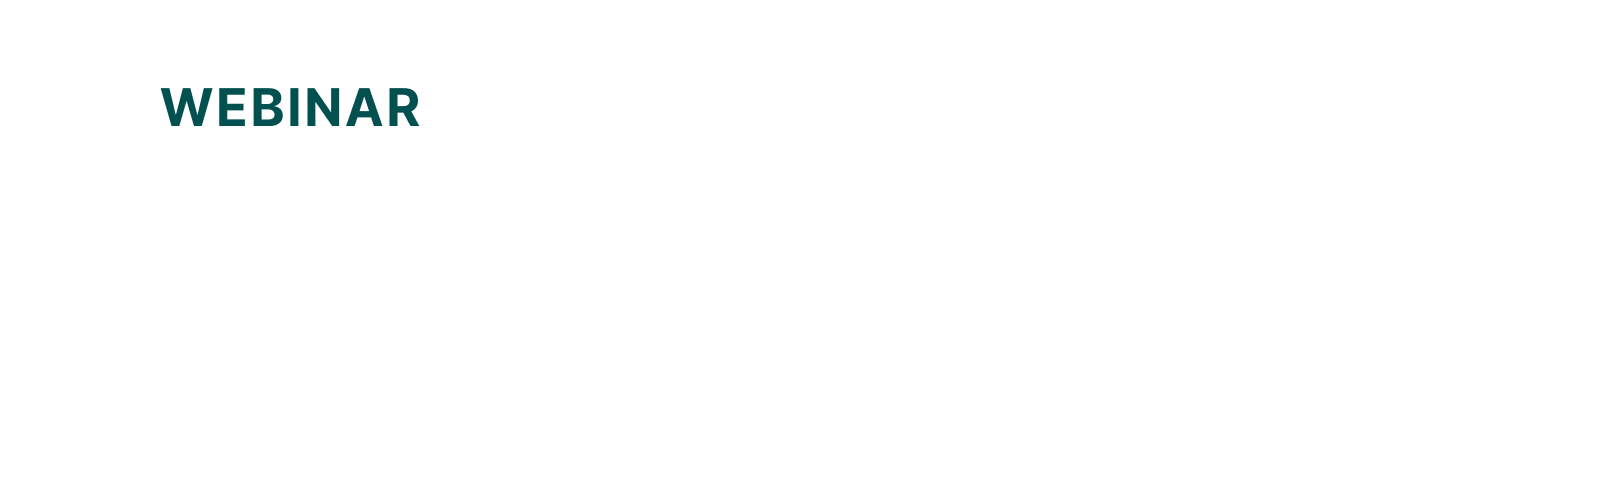 Webinar Lead Gen: Attract, Engage, and Convert Your Audience